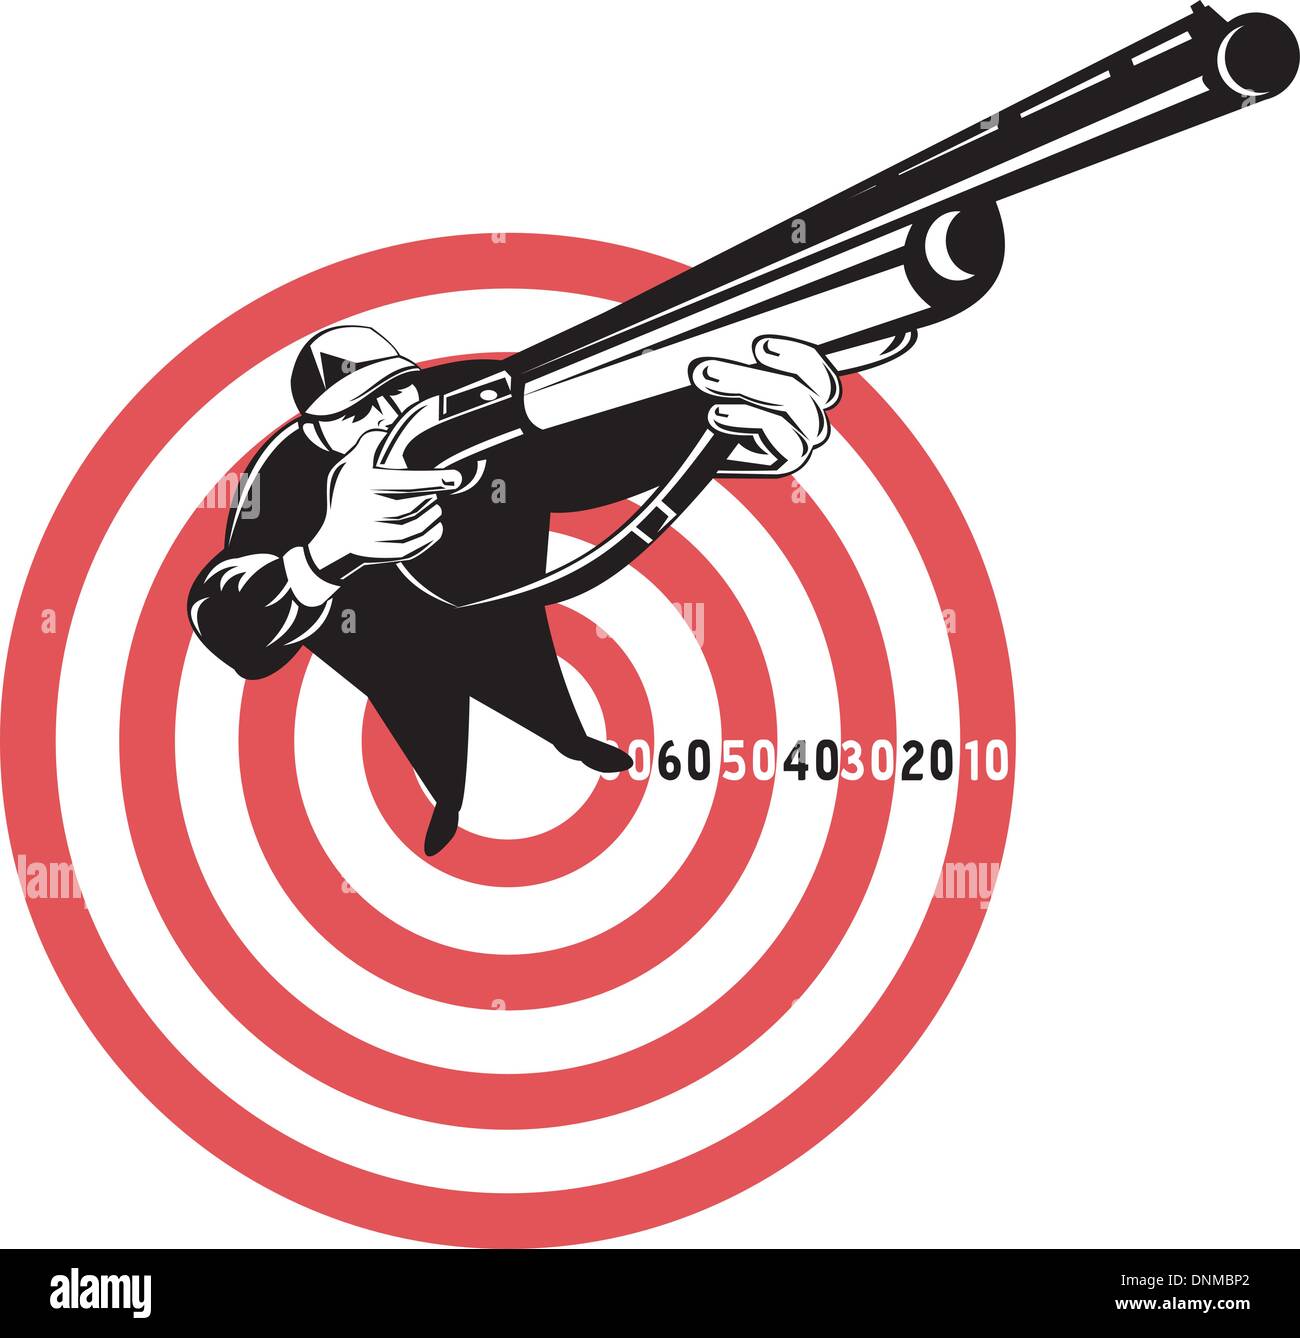 graphic design illustration of a Hunter aiming rifle shotgun with bulls eye in background viewed from a high angle Stock Vector